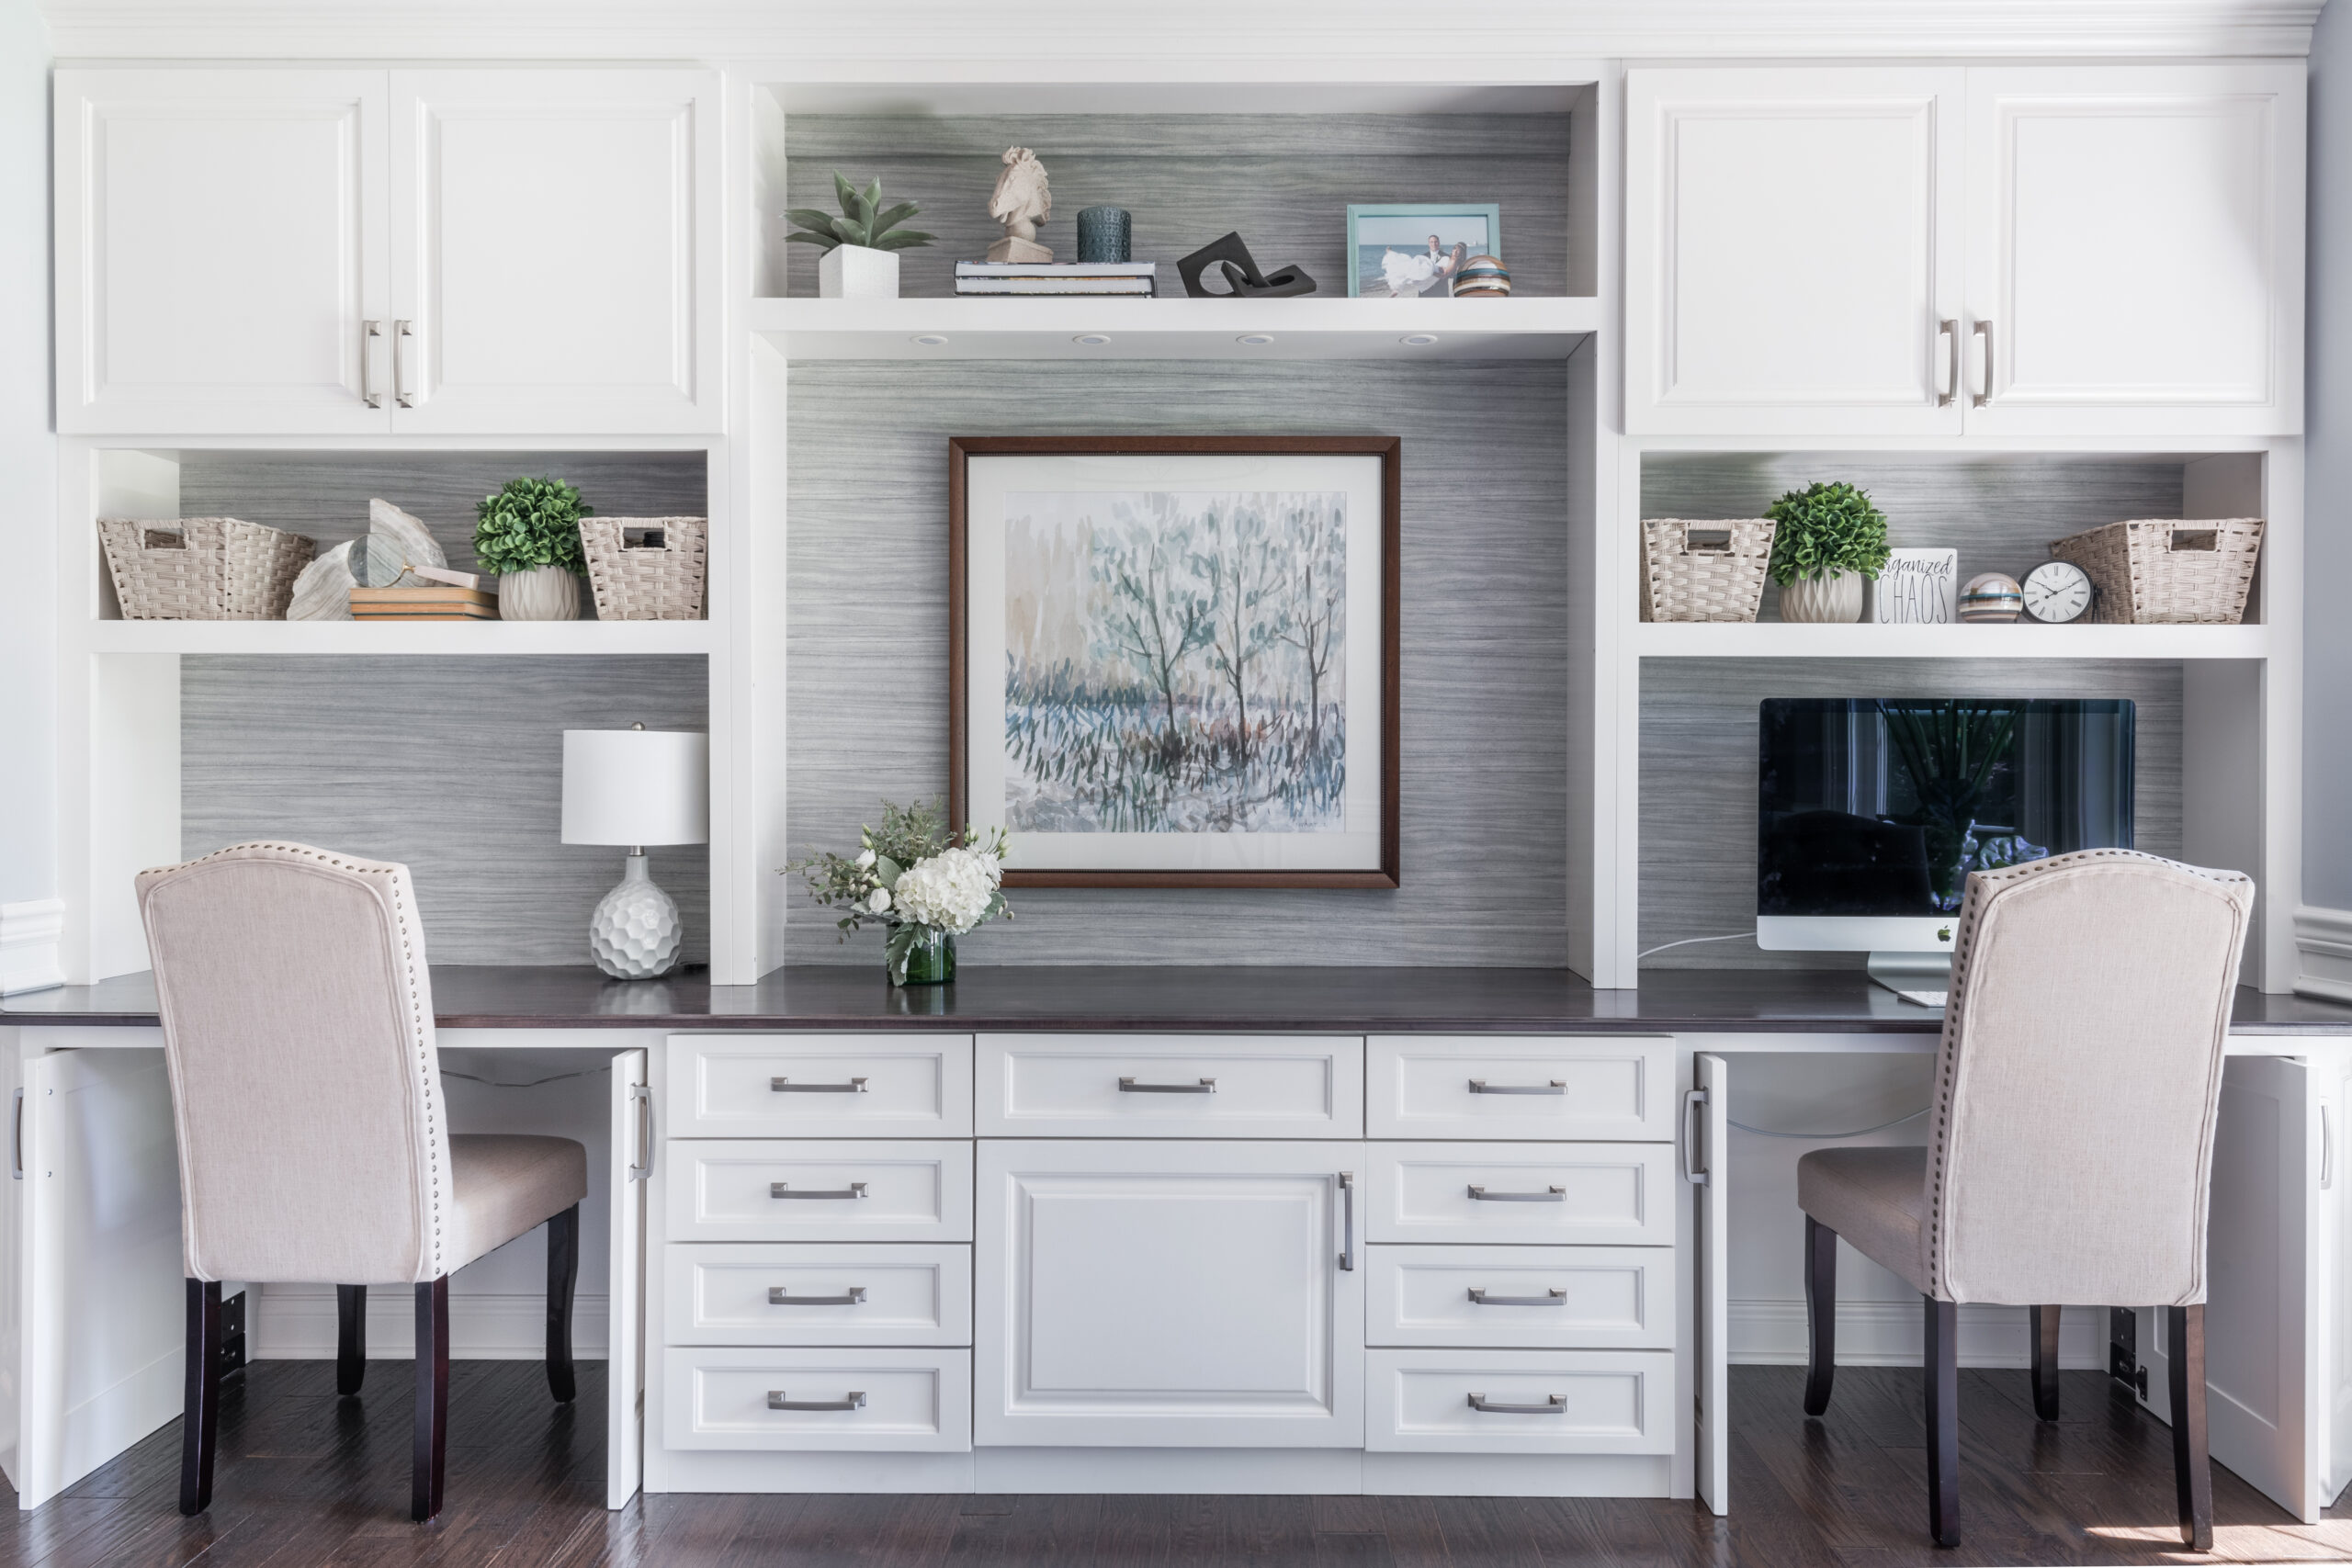 Home office with built-in white custom cabinetry, two desk areas with chairs.